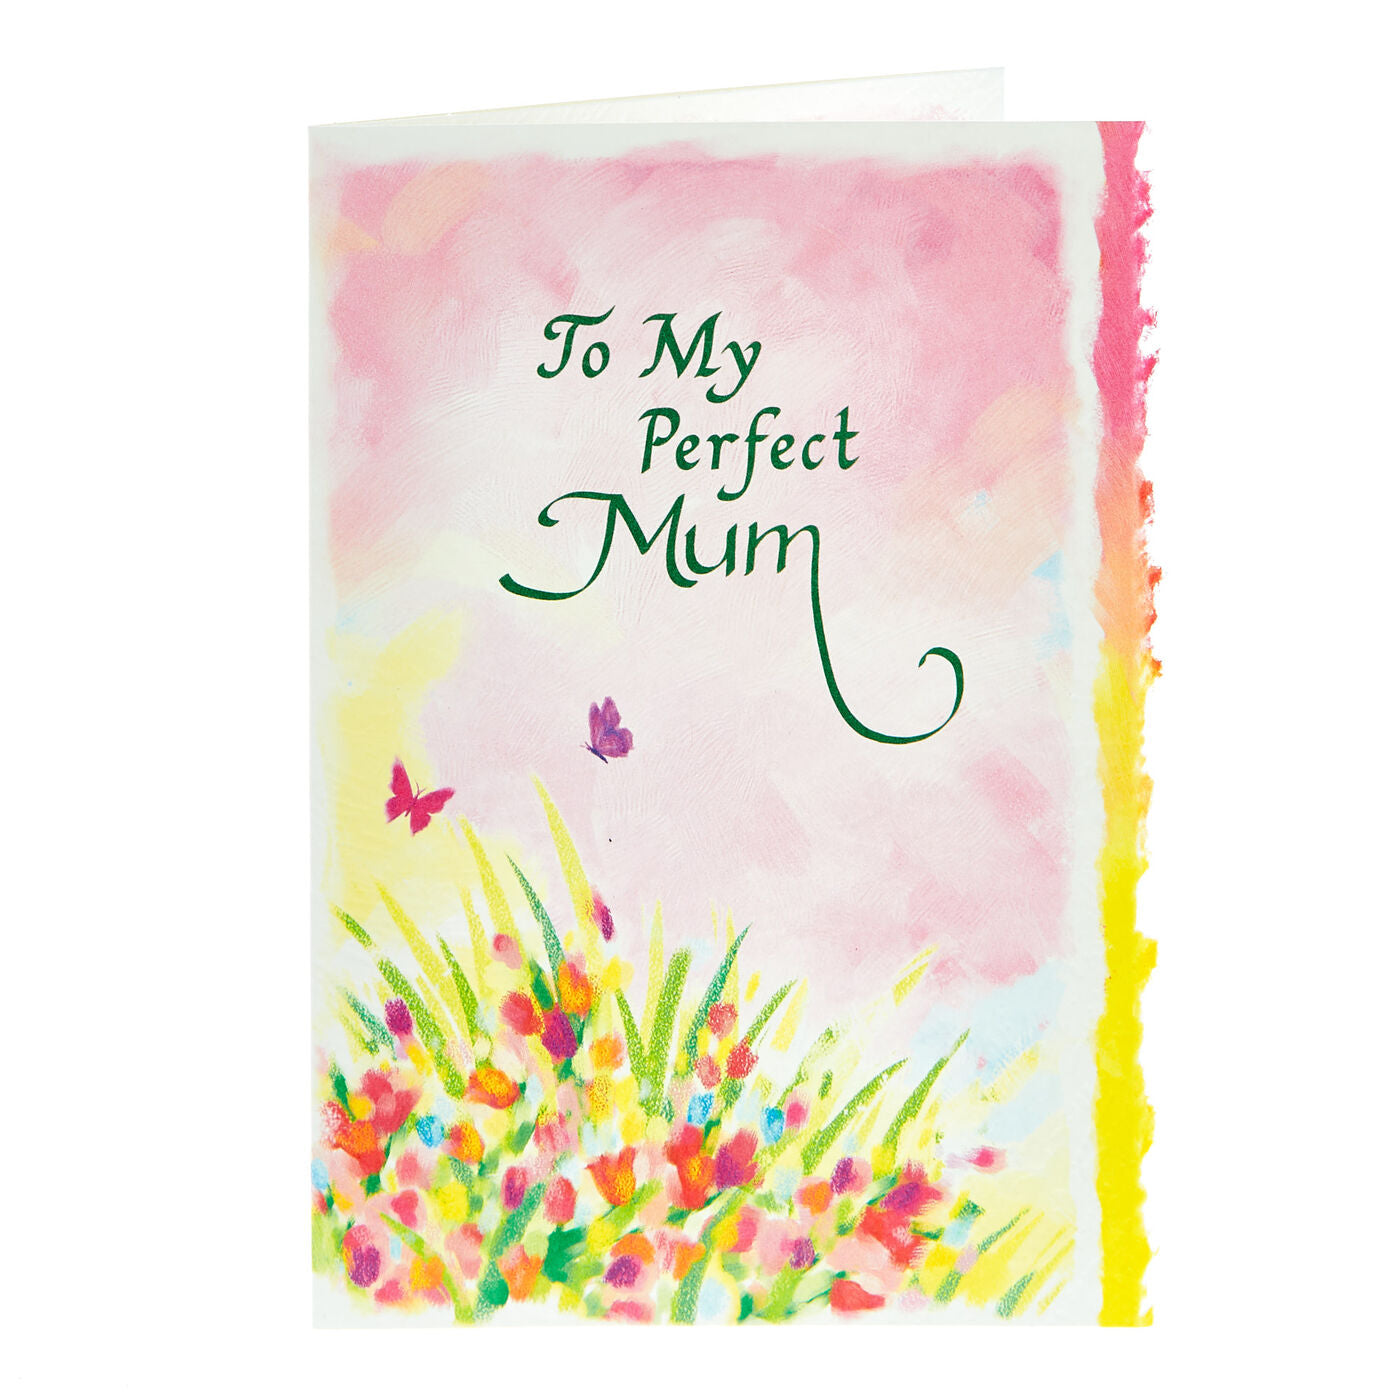 To My Perfect Mum Card - Blue Mountain Arts